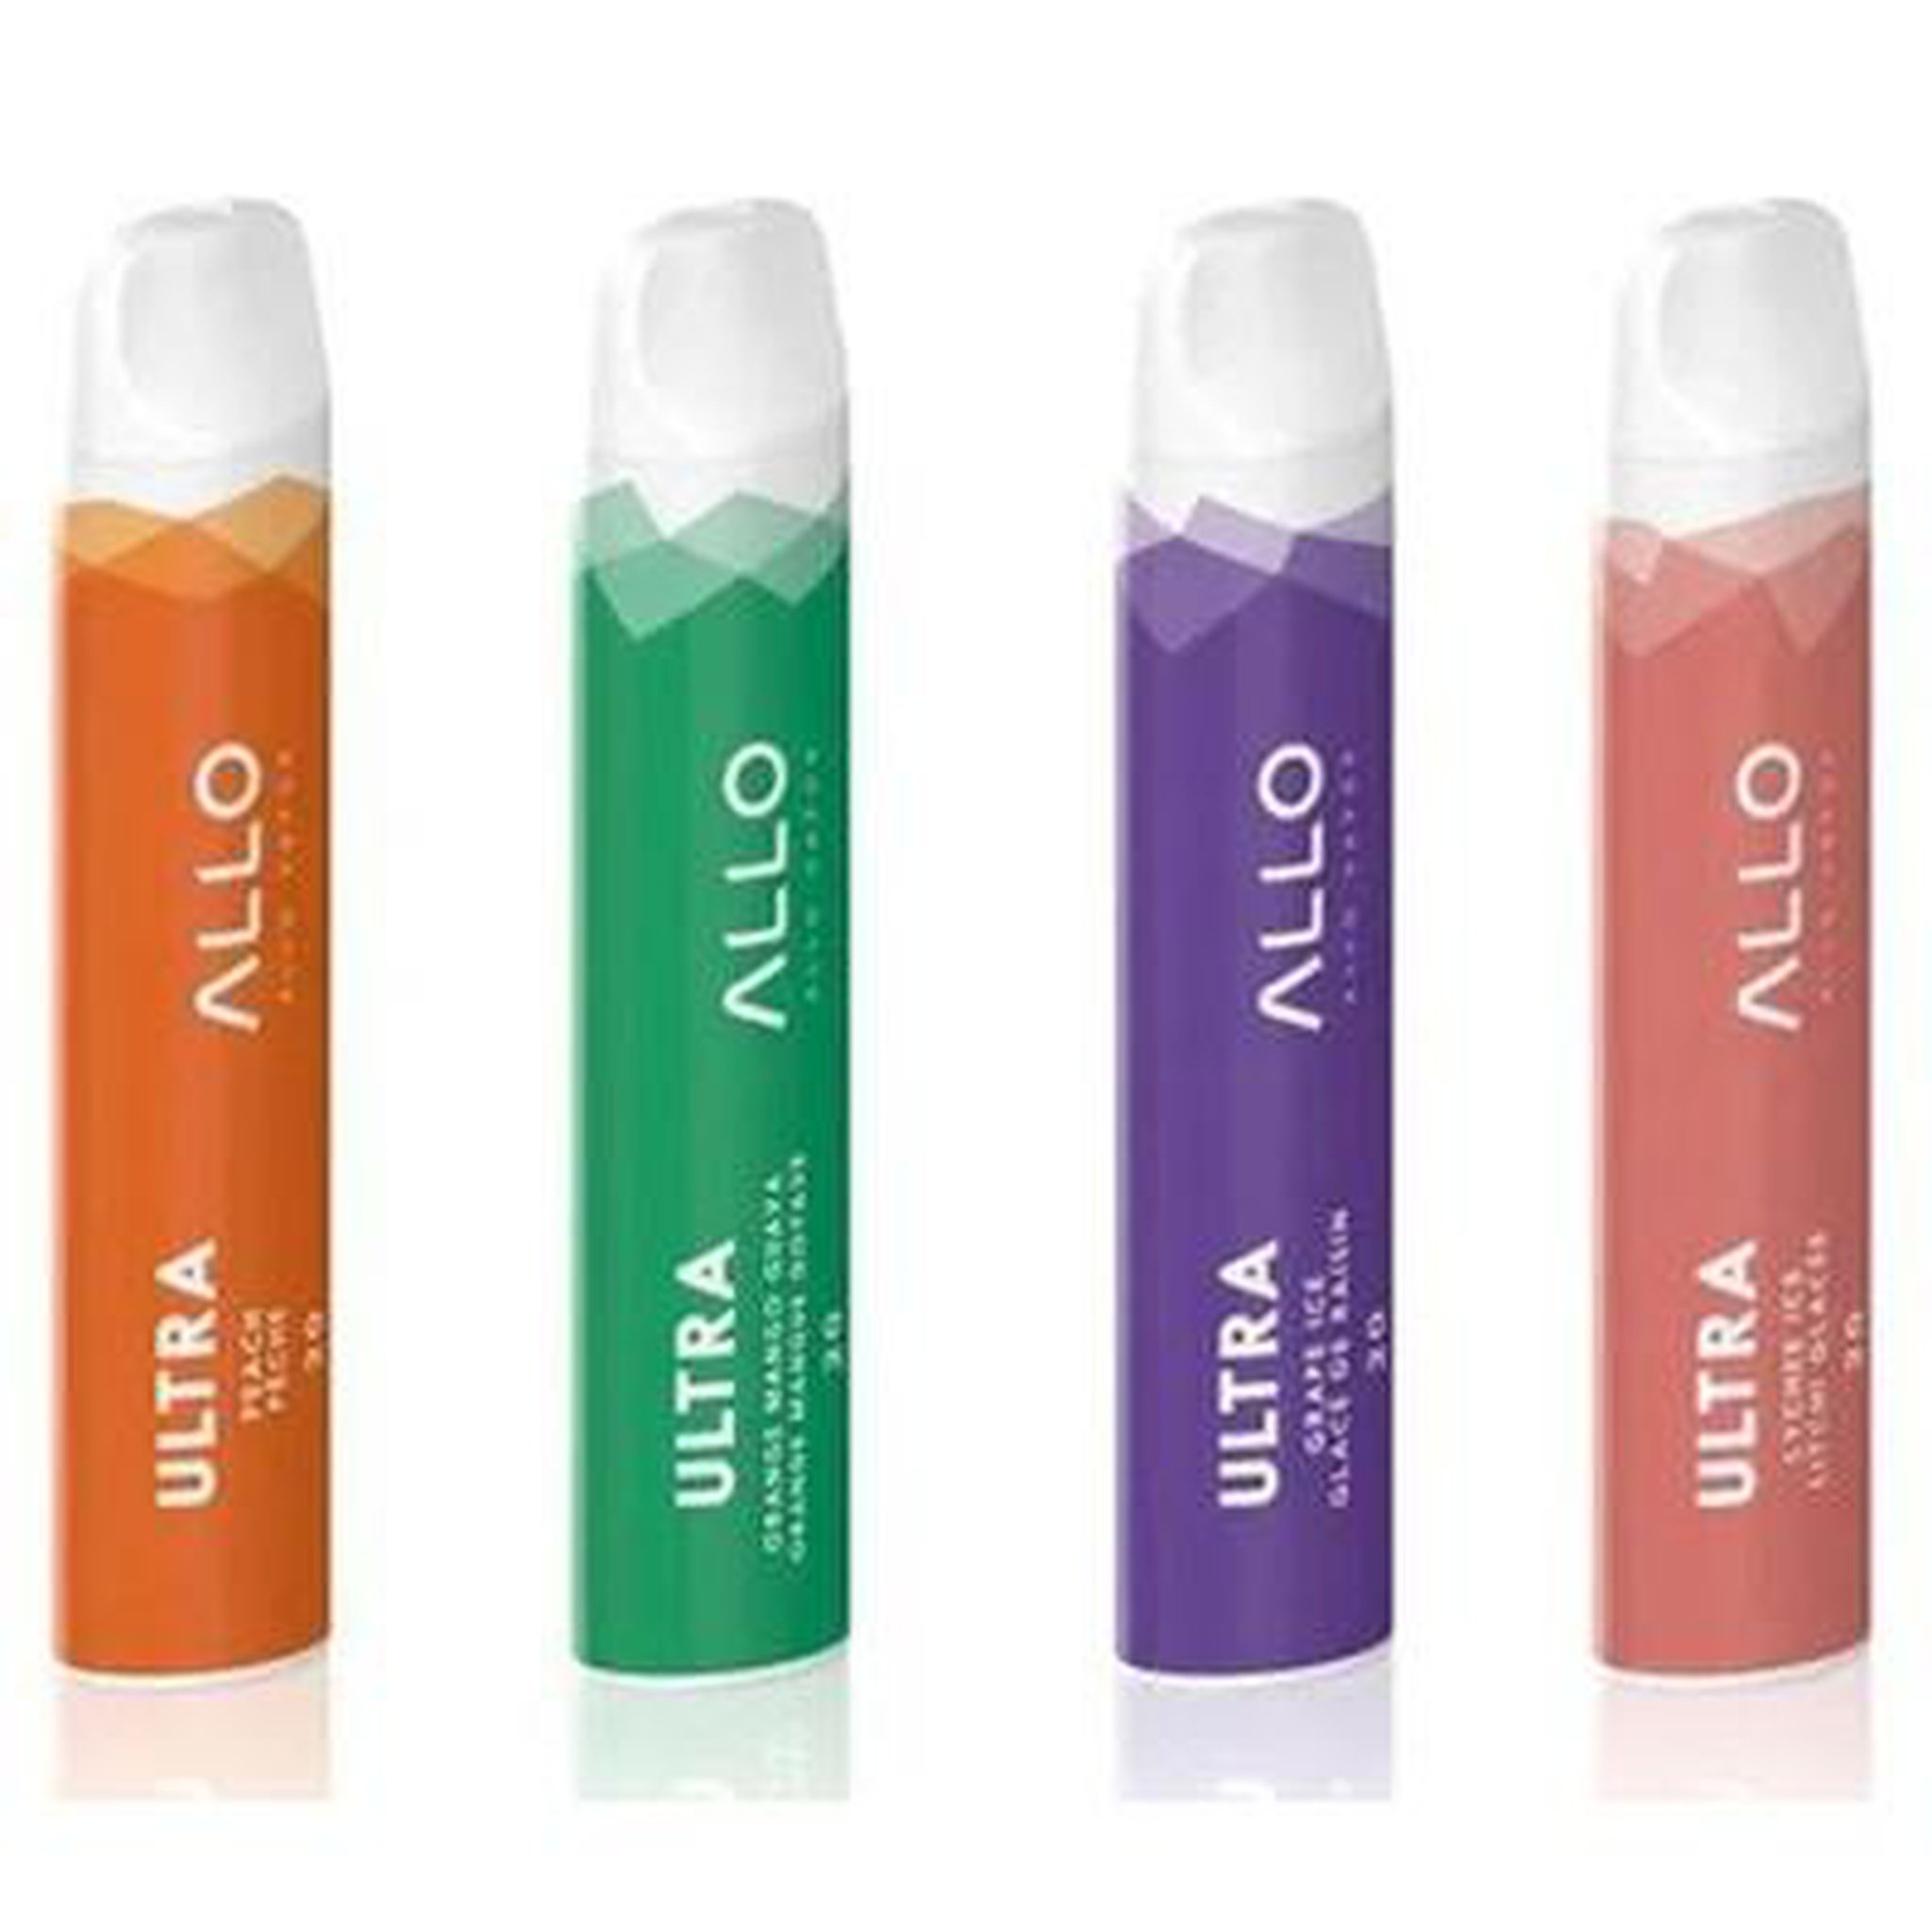 "Allo Ultra Disposable - 800 Puffs - 50 MG " "Get this new disposable on vape4change! It has Battery: 550mAh Internal Battery, Puff: ~800 Puffs, E-Liquid Capacity: 3.8 ML & Nicotine Strength: 50mg.
"	
SOURCE :https://vape4change.ca/collections/top-sellers/products/allo-ultra-disposable	
PRICE :$1 by Vape4change